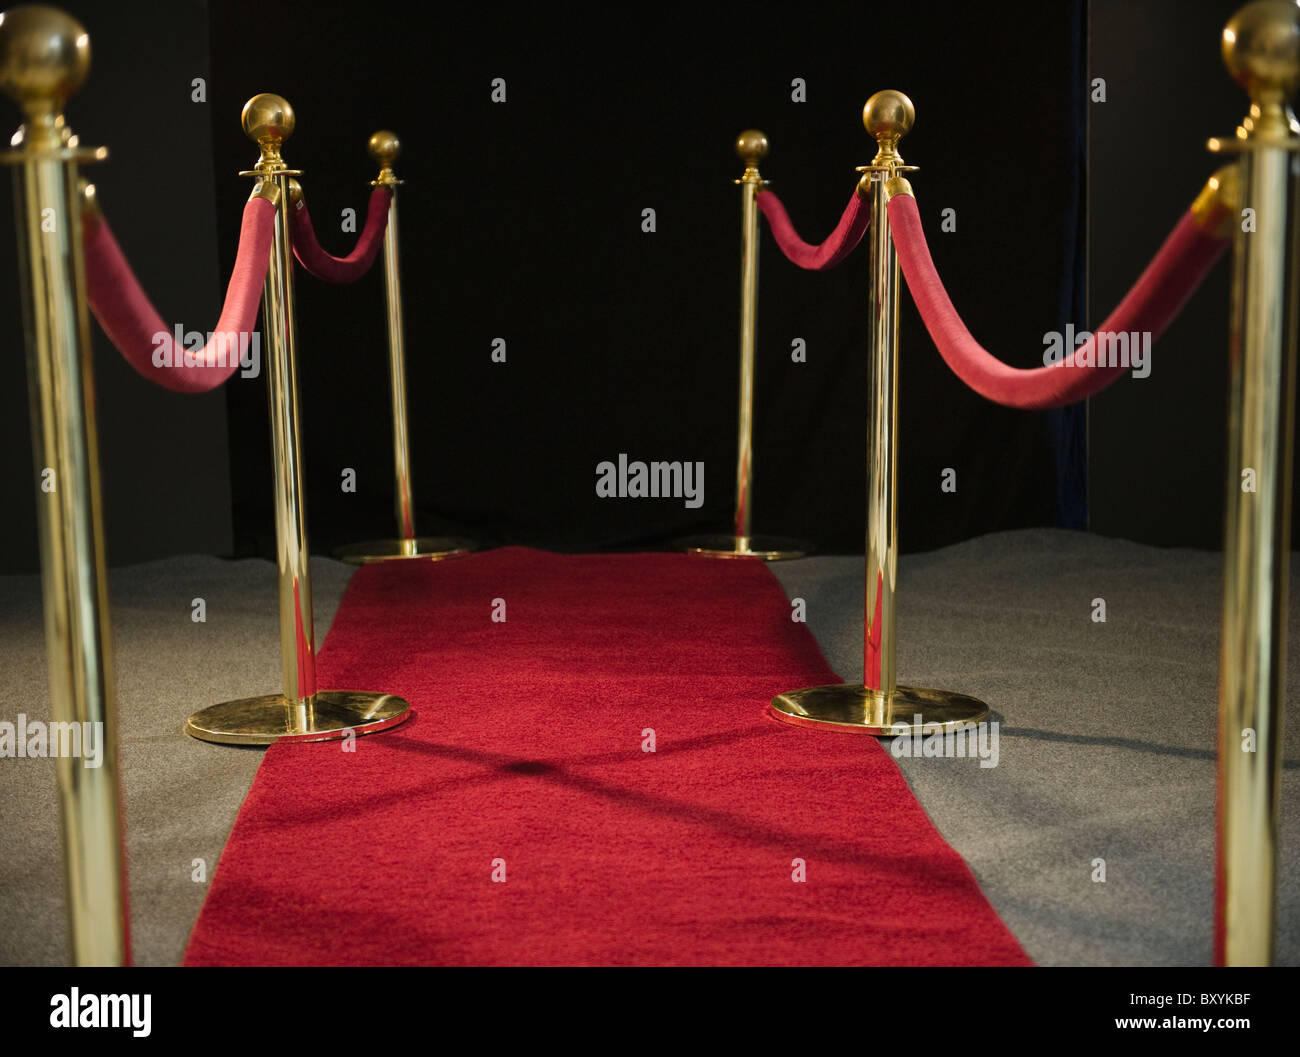 Rope barriers at red carpet event Stock Photo